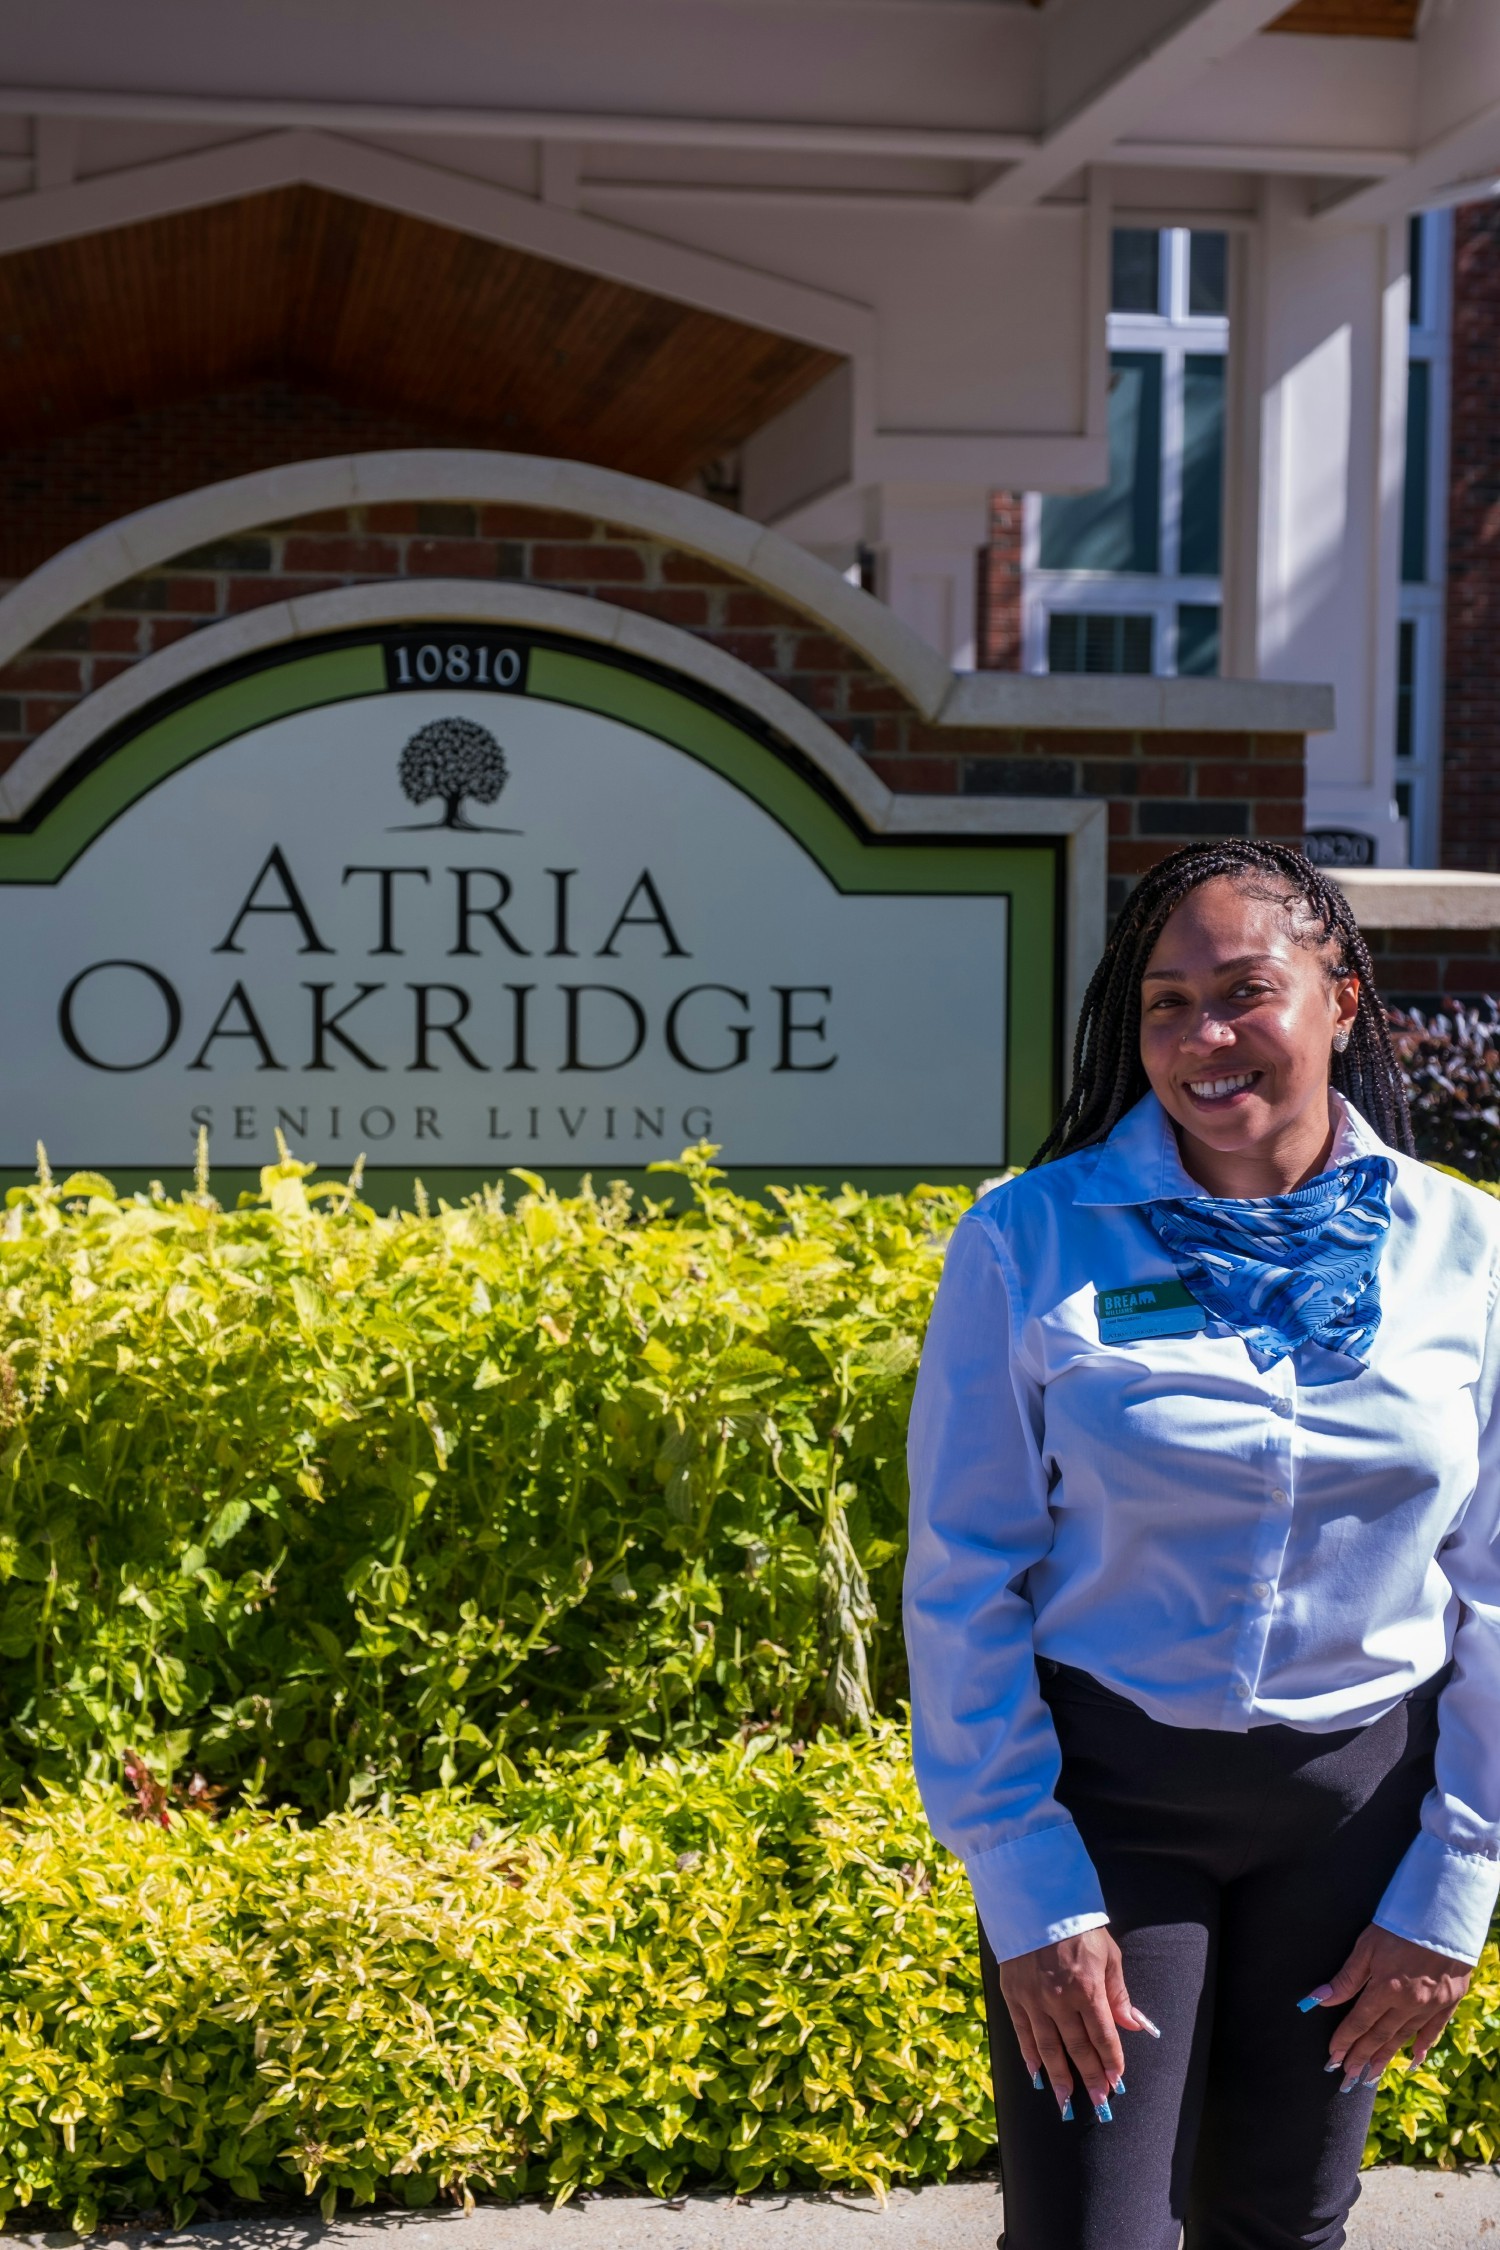 Breana is a receptionist at Atria Oakridge, where she always greets residents and visitors with a smile.